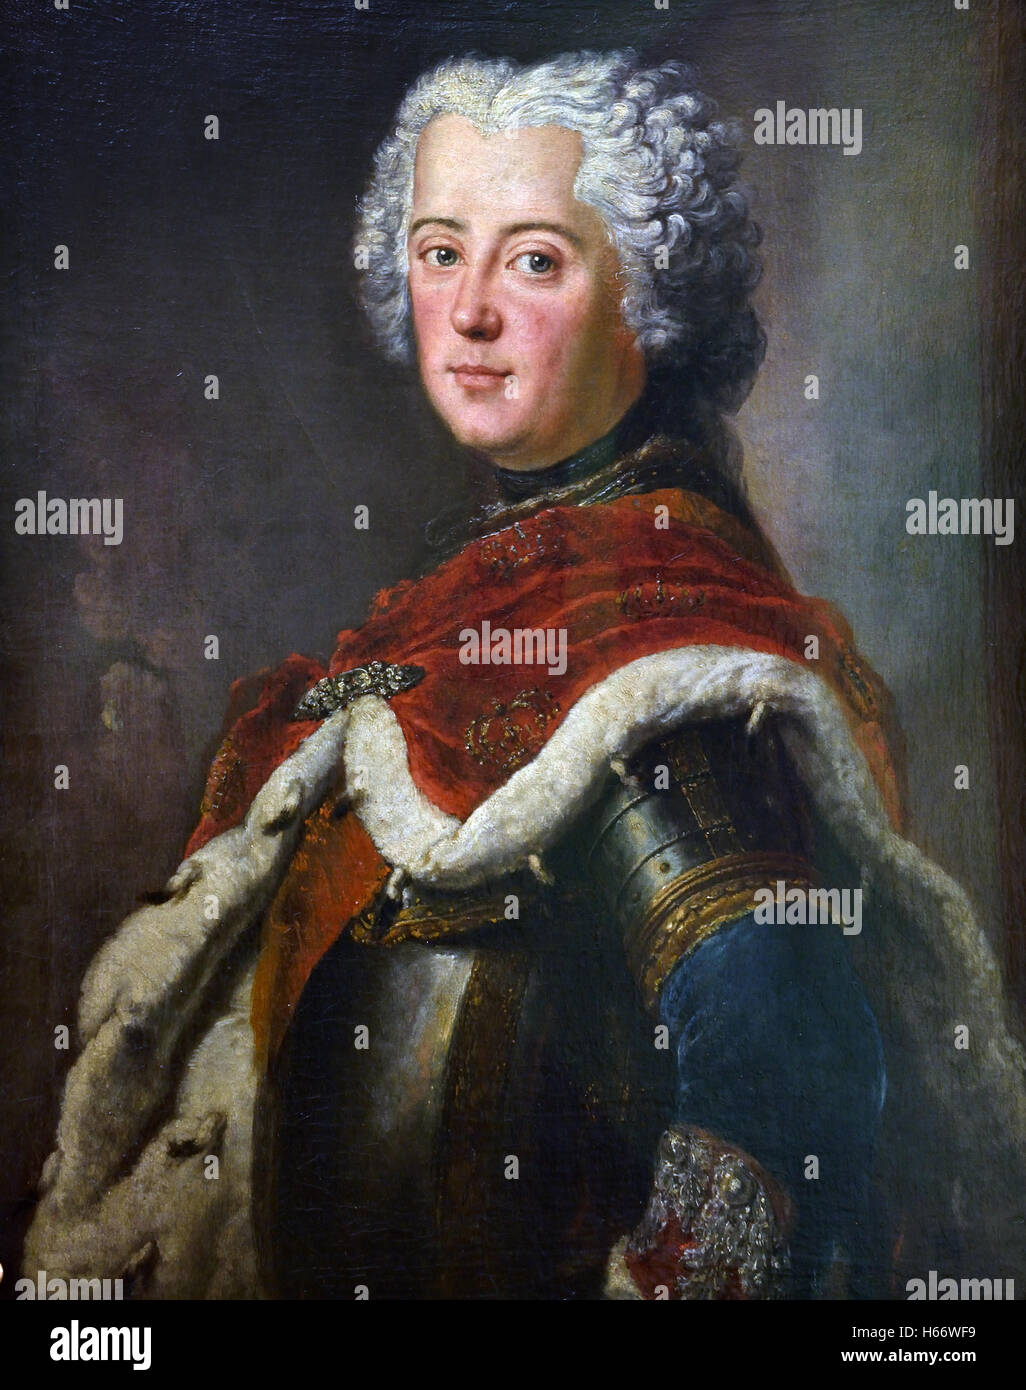 Frederick the Great (1712-1786) as crown prince  - Frederick II  was King of Prussia from 1740 until 1786, the longest reign of any Hohenzollern King painter Antoine Pesne 1683-1757   German Germany Stock Photo